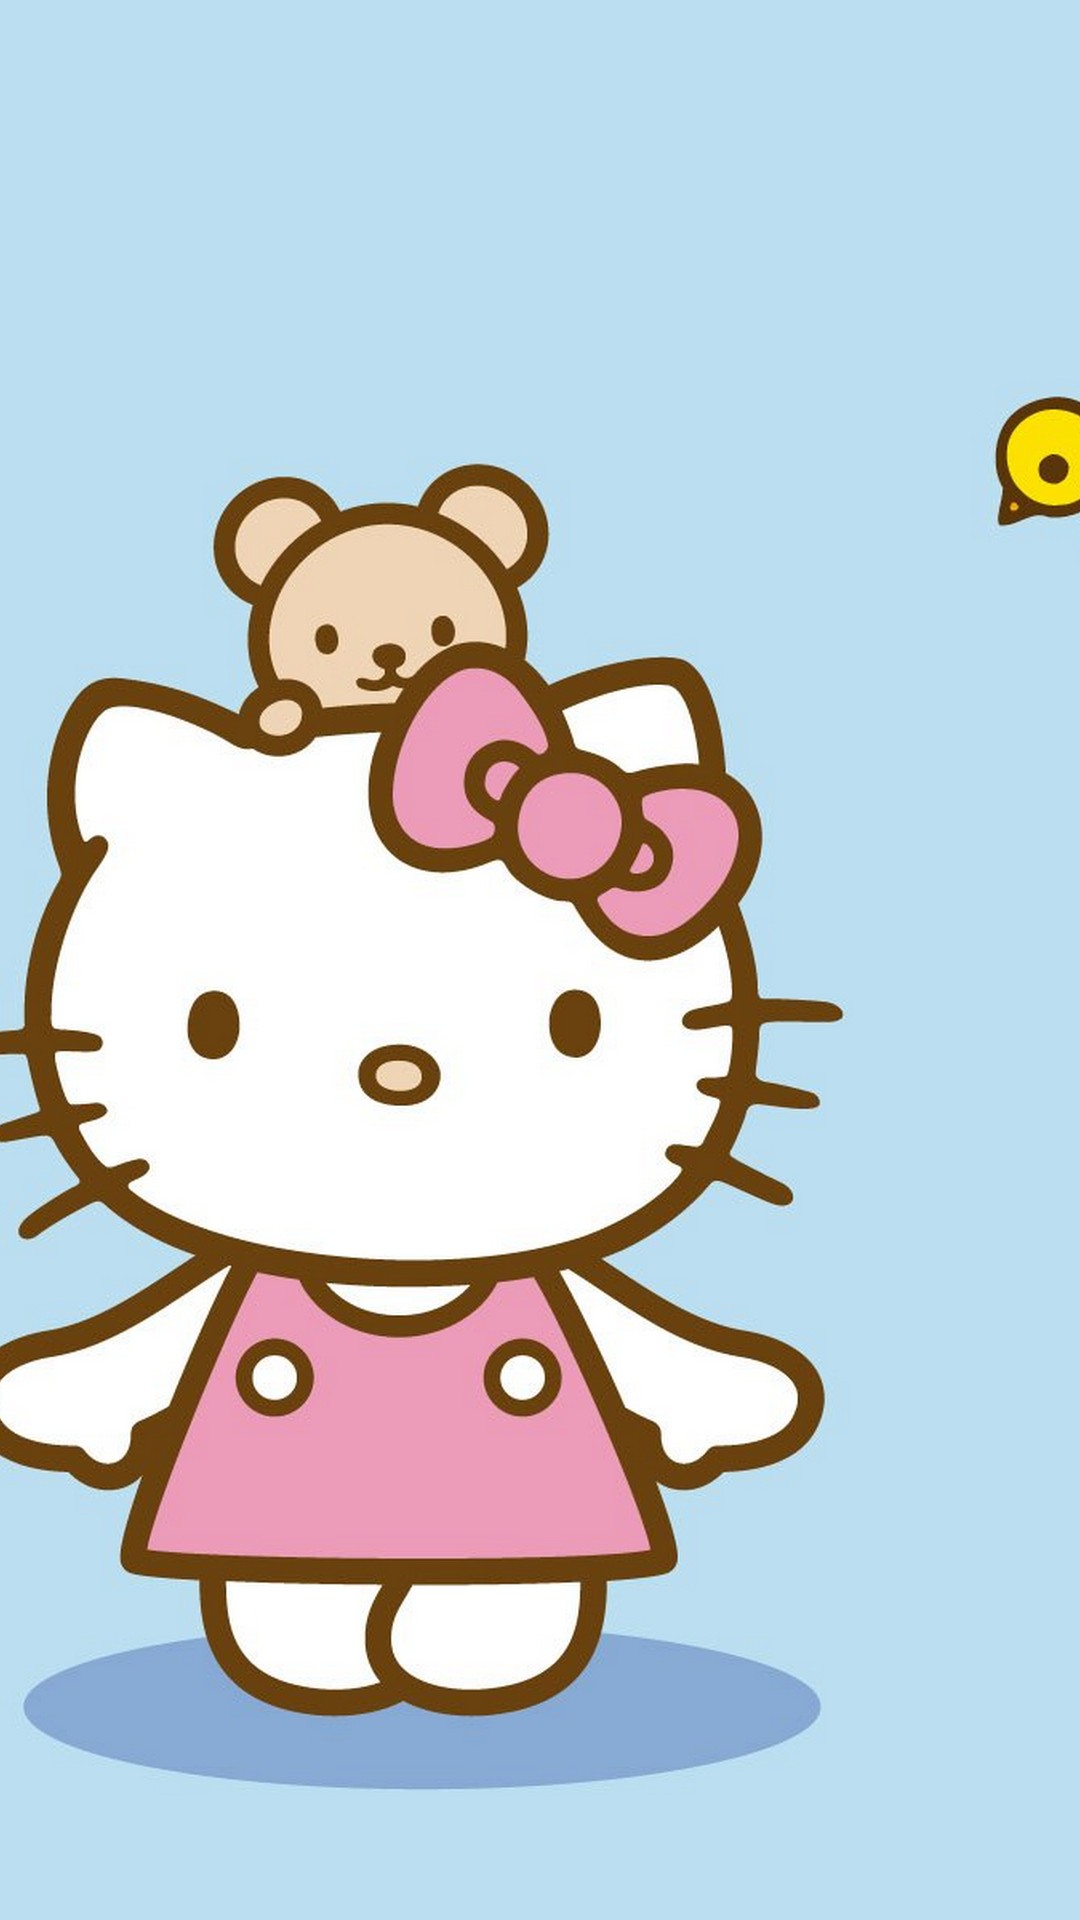 Hello Kitty Mobile Wallpaper HD With Resolution 1080X1920 pixel. You can make this wallpaper for your Desktop Computer Backgrounds, Mac Wallpapers, Android Lock screen or iPhone Screensavers